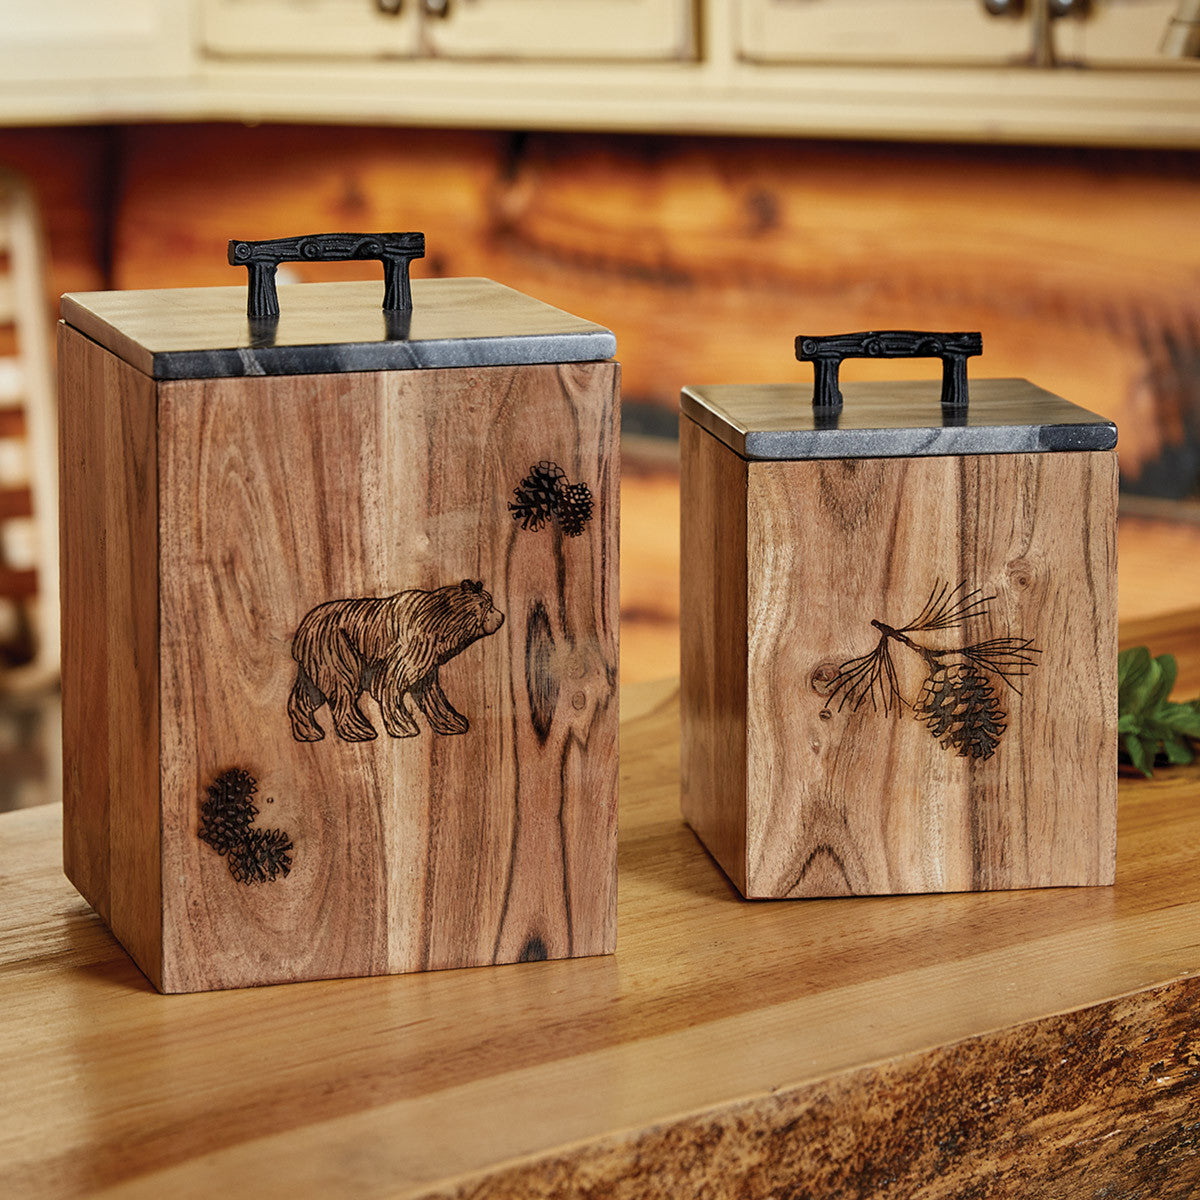 Small Wood Storage Box with Lid for Storing Small Items